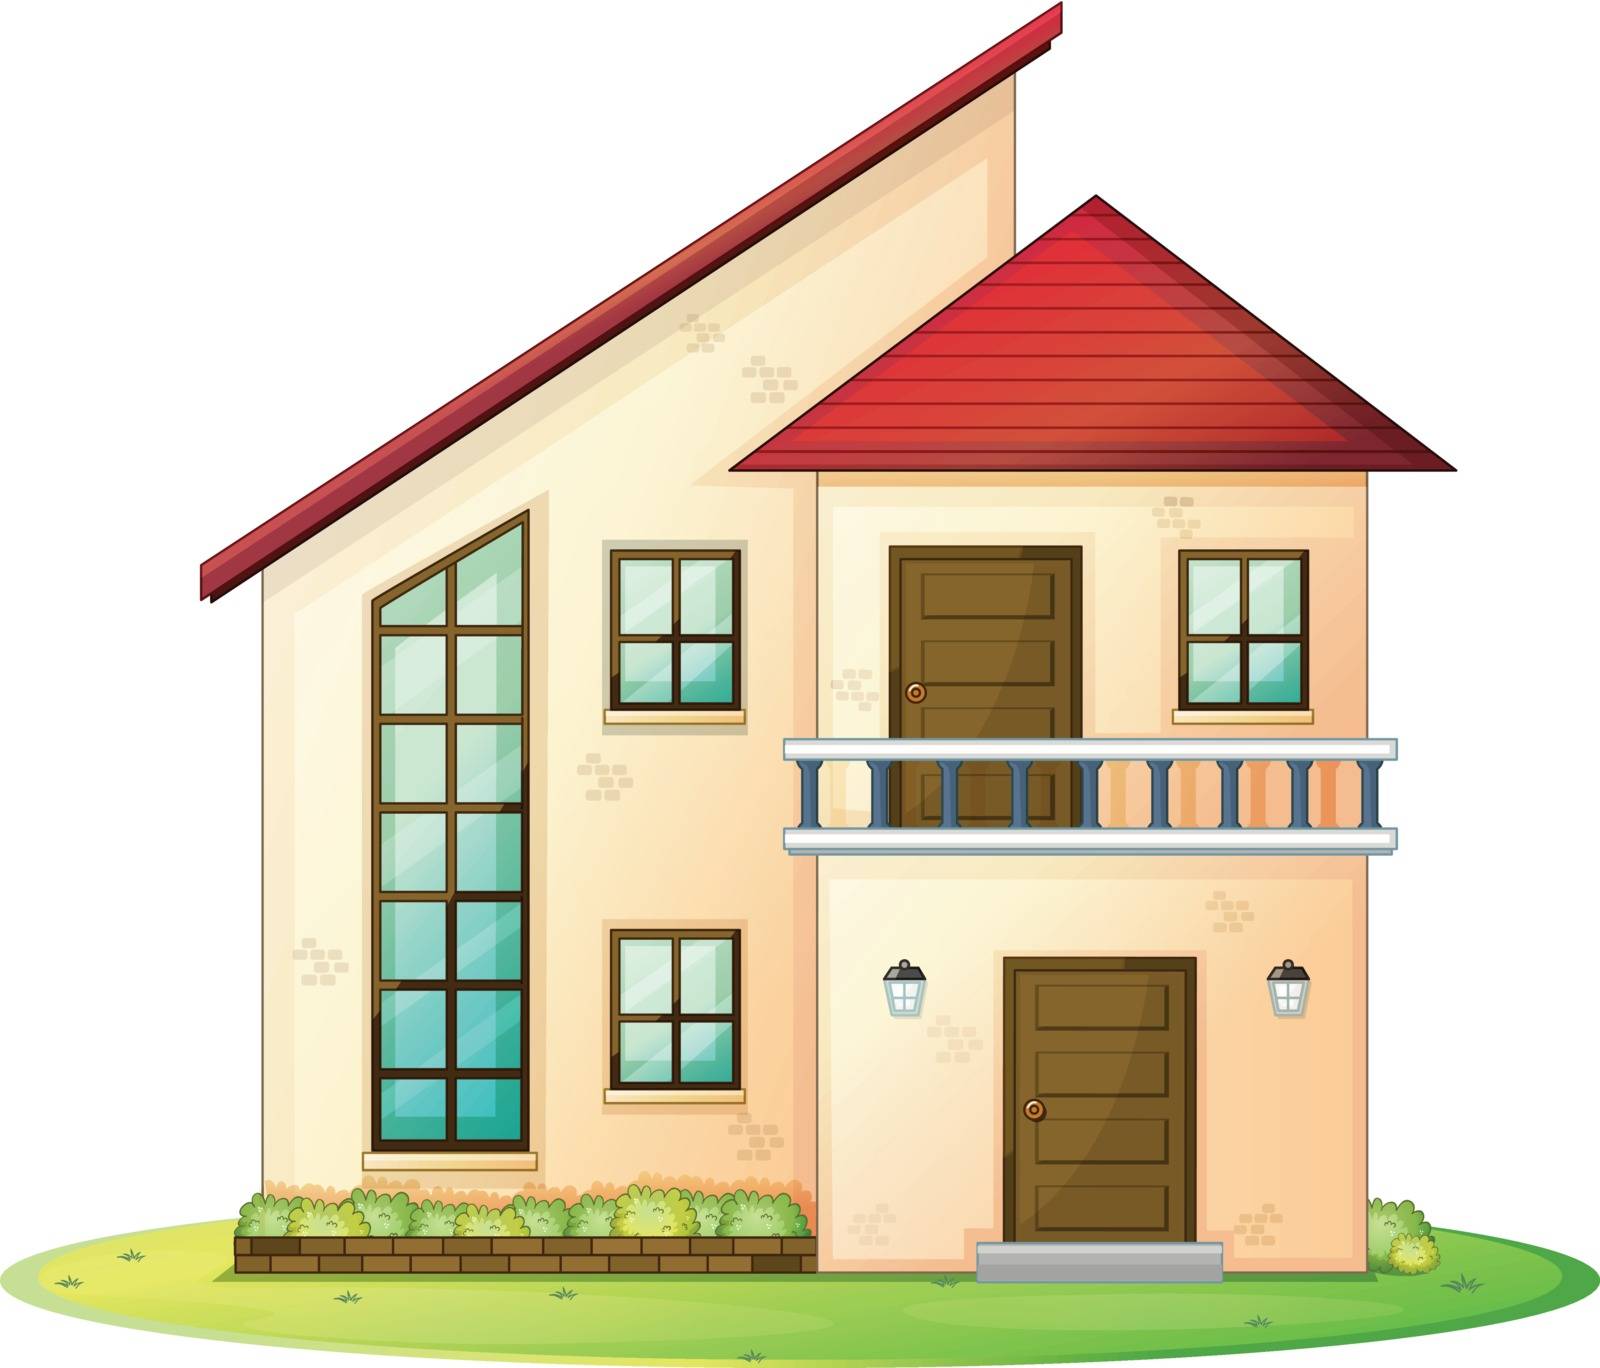 illustration of a house on a white background